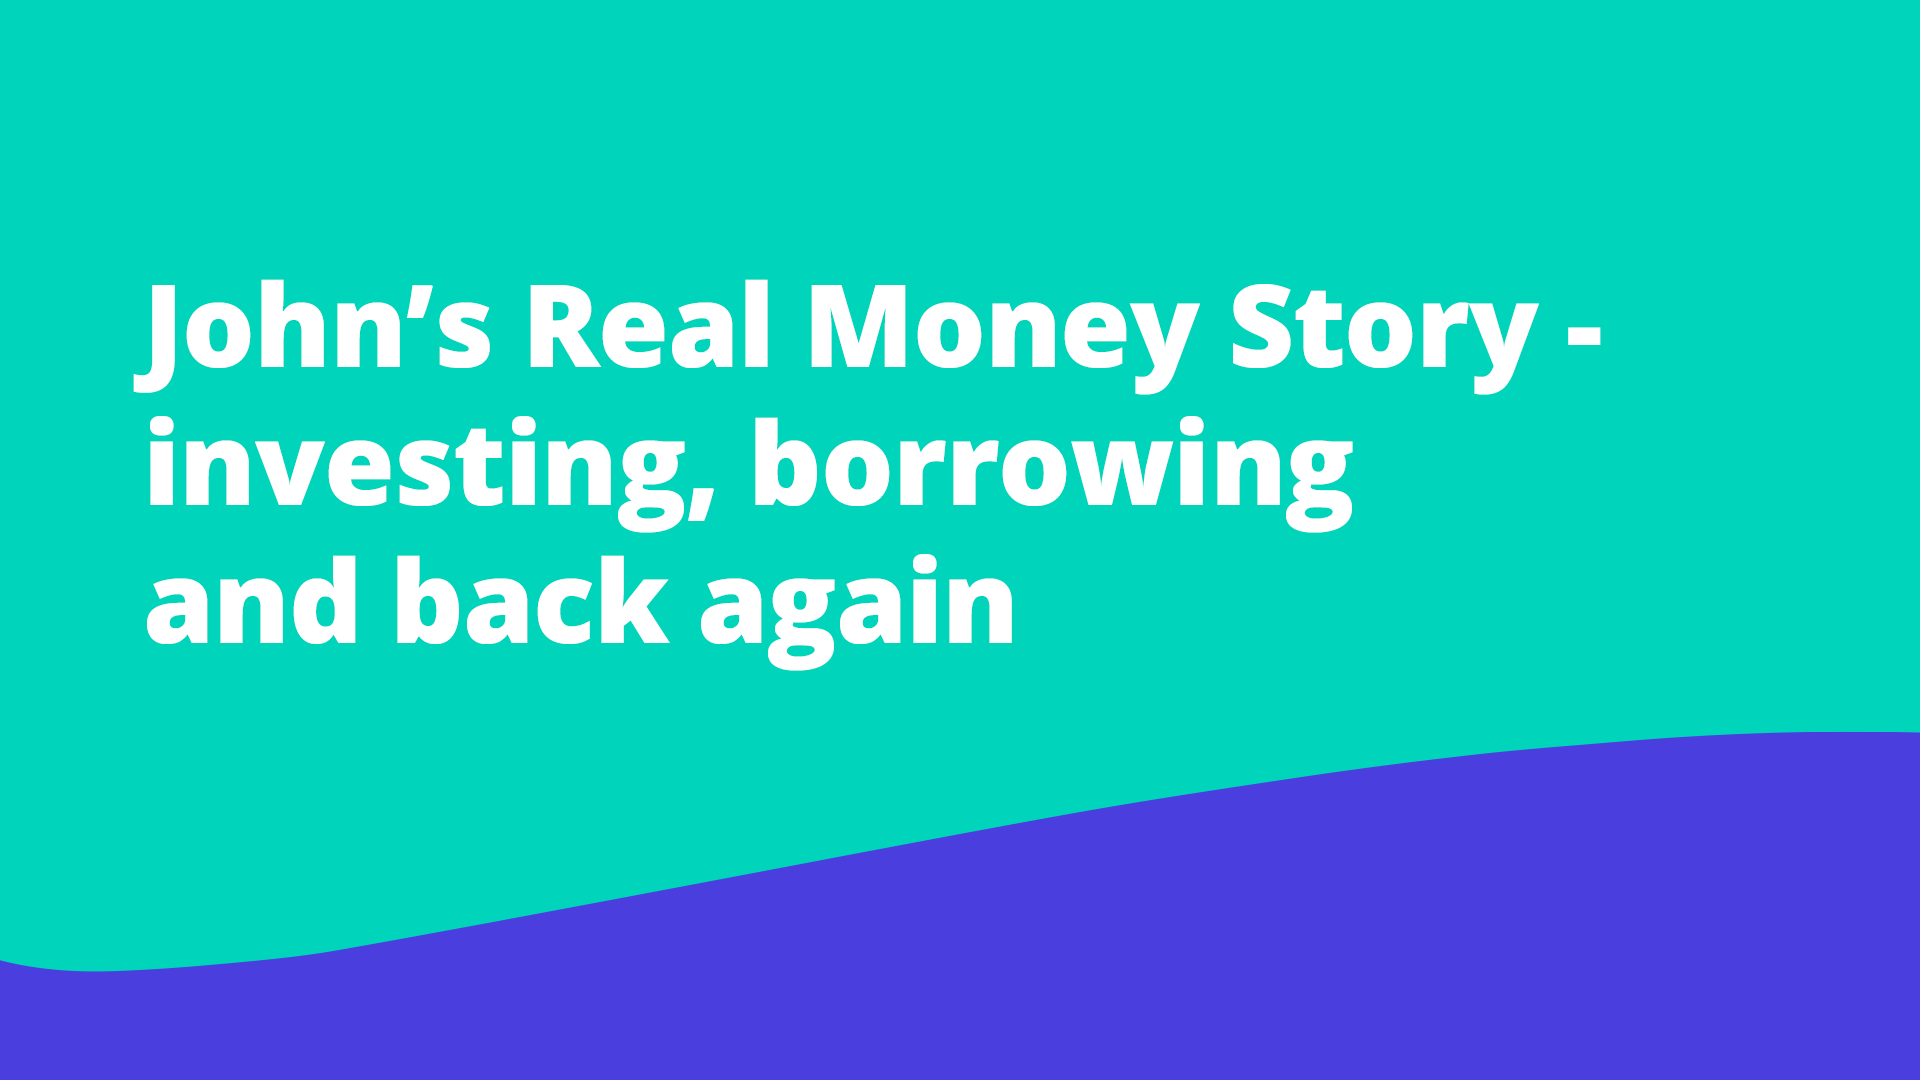 Featured image for John’s Real Money Story - investing, borrowing and back again  